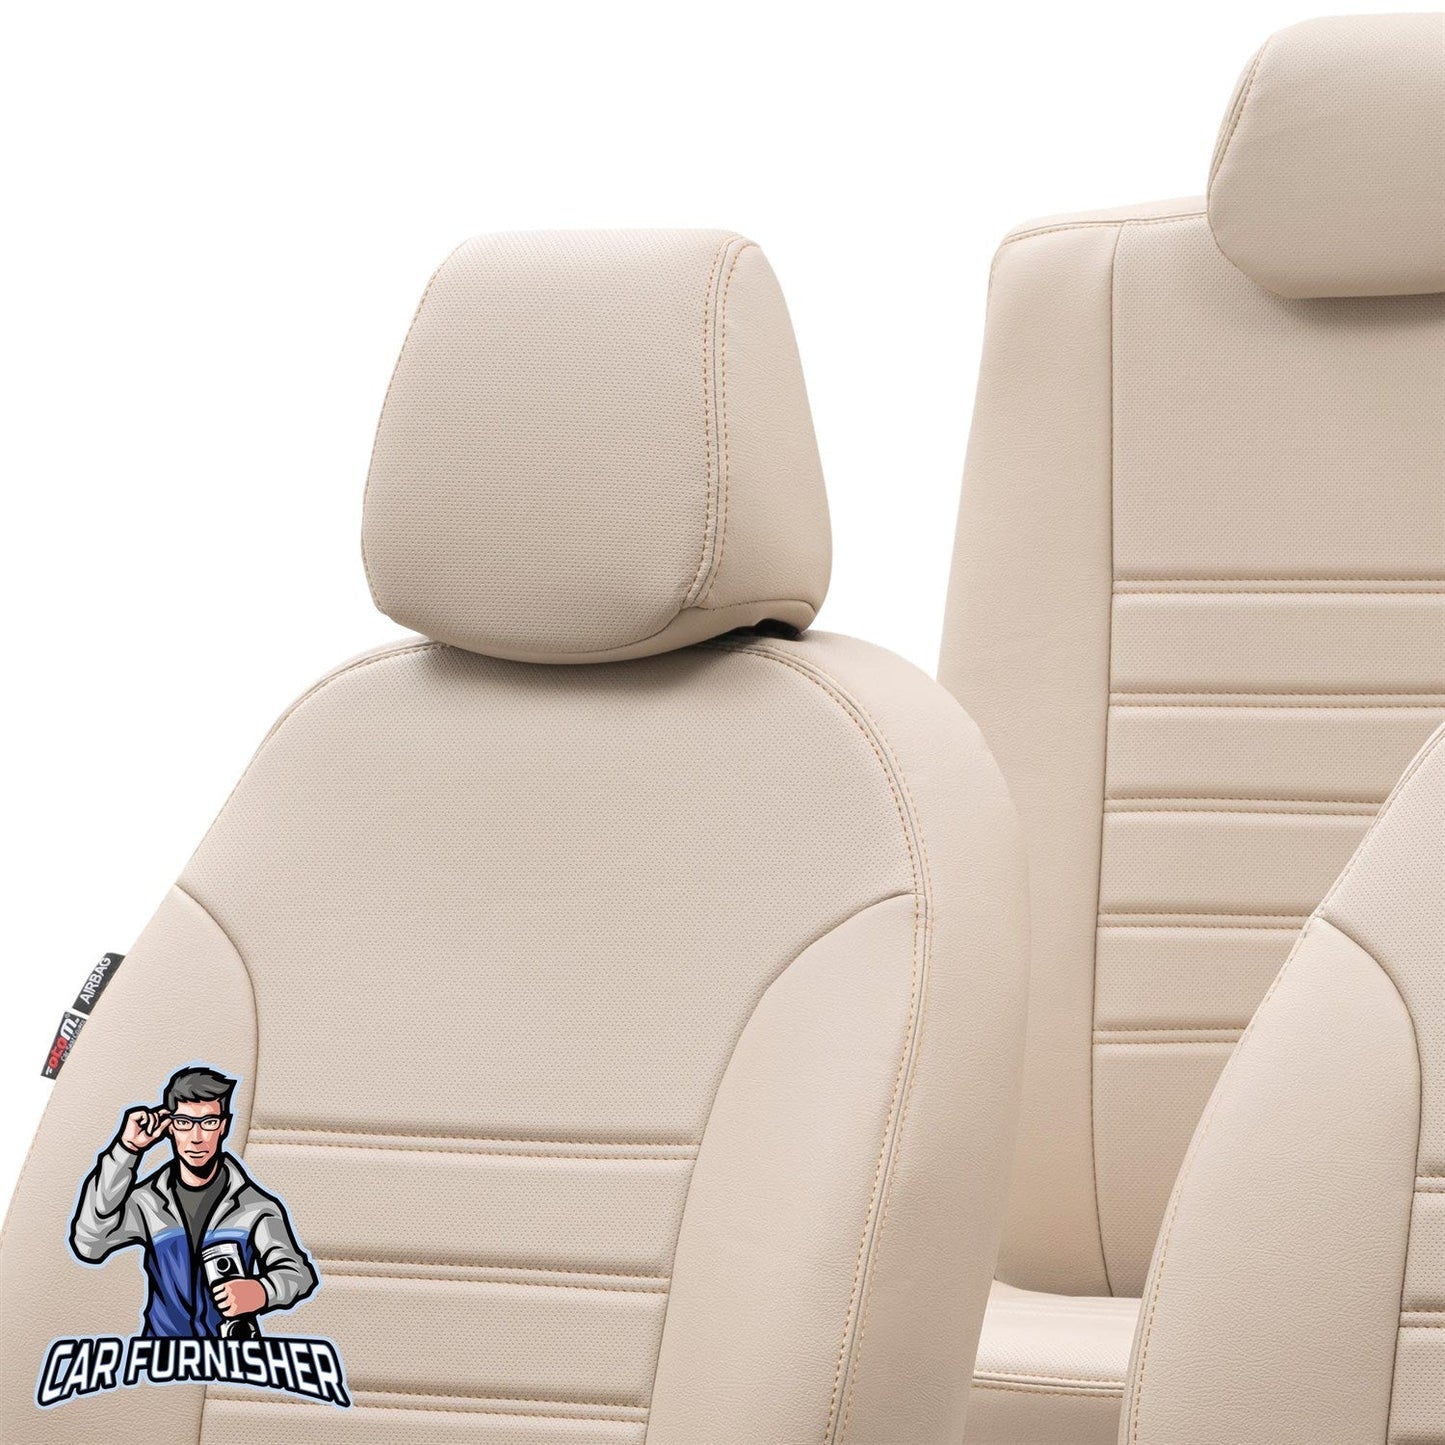 Renault Modus Seat Covers Istanbul Leather Design Beige Leather